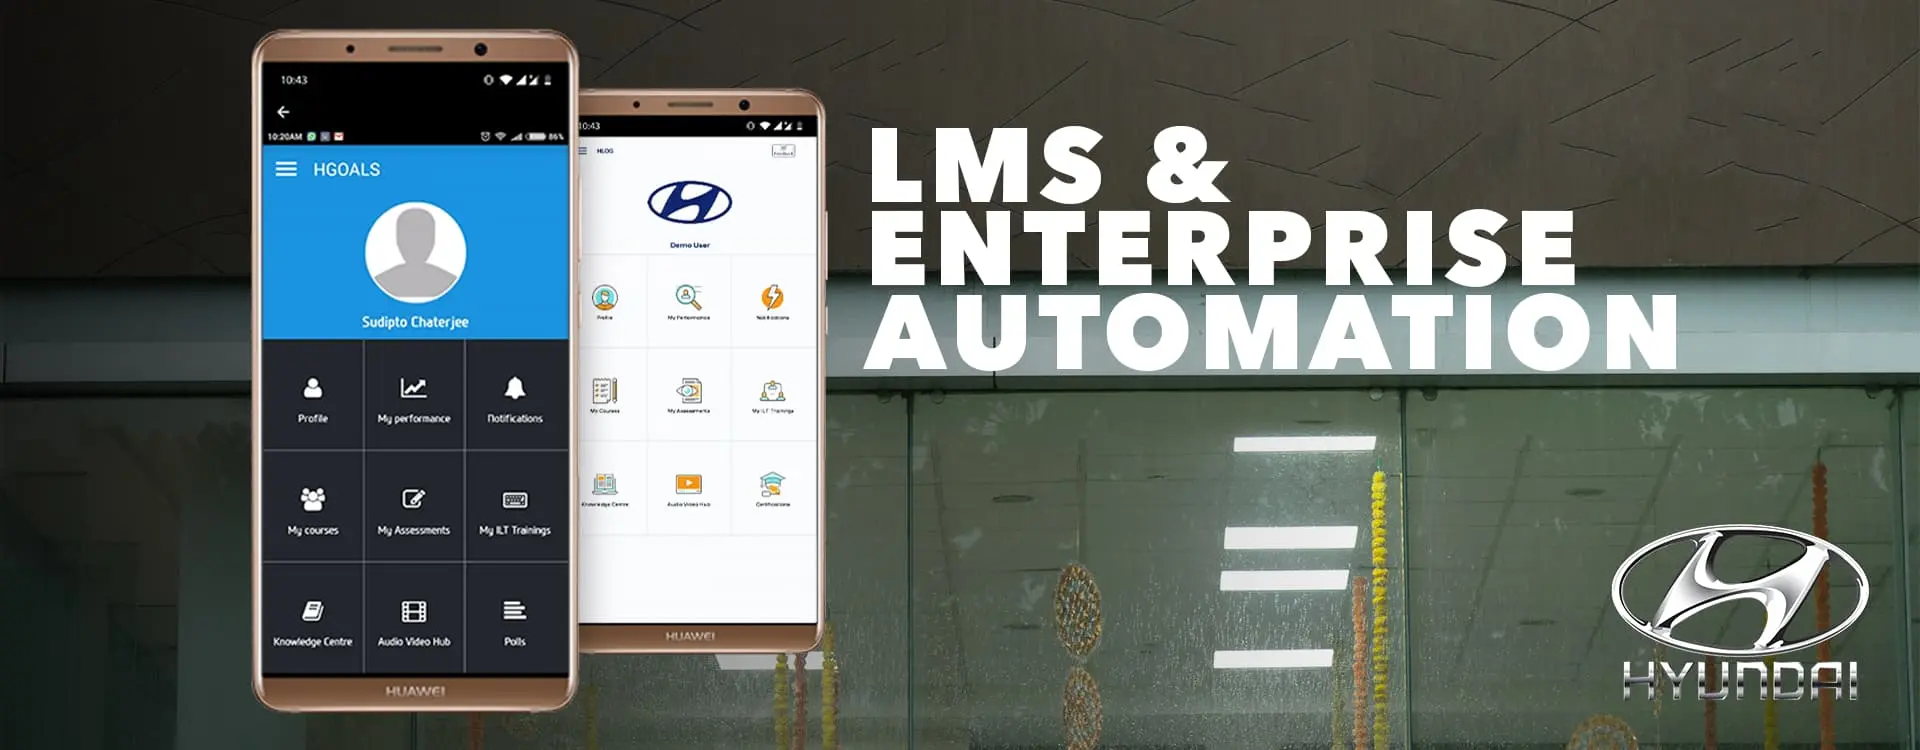 LMS Mobile Application for Automobile Company